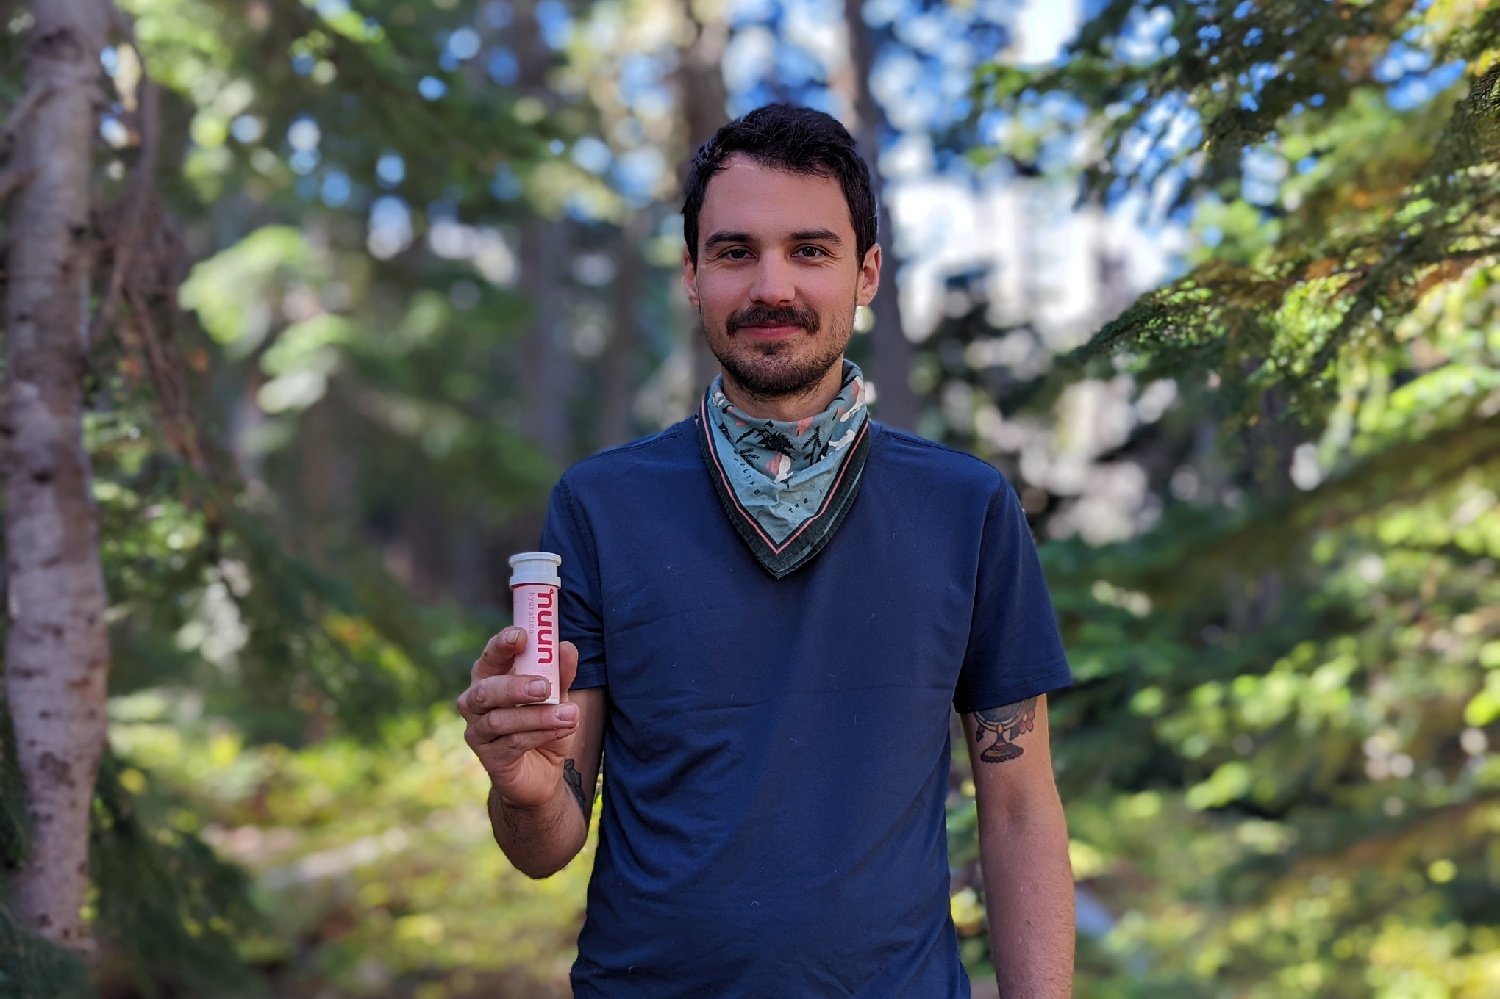 A hiker in a forest holding a bottle of Nuun tablets